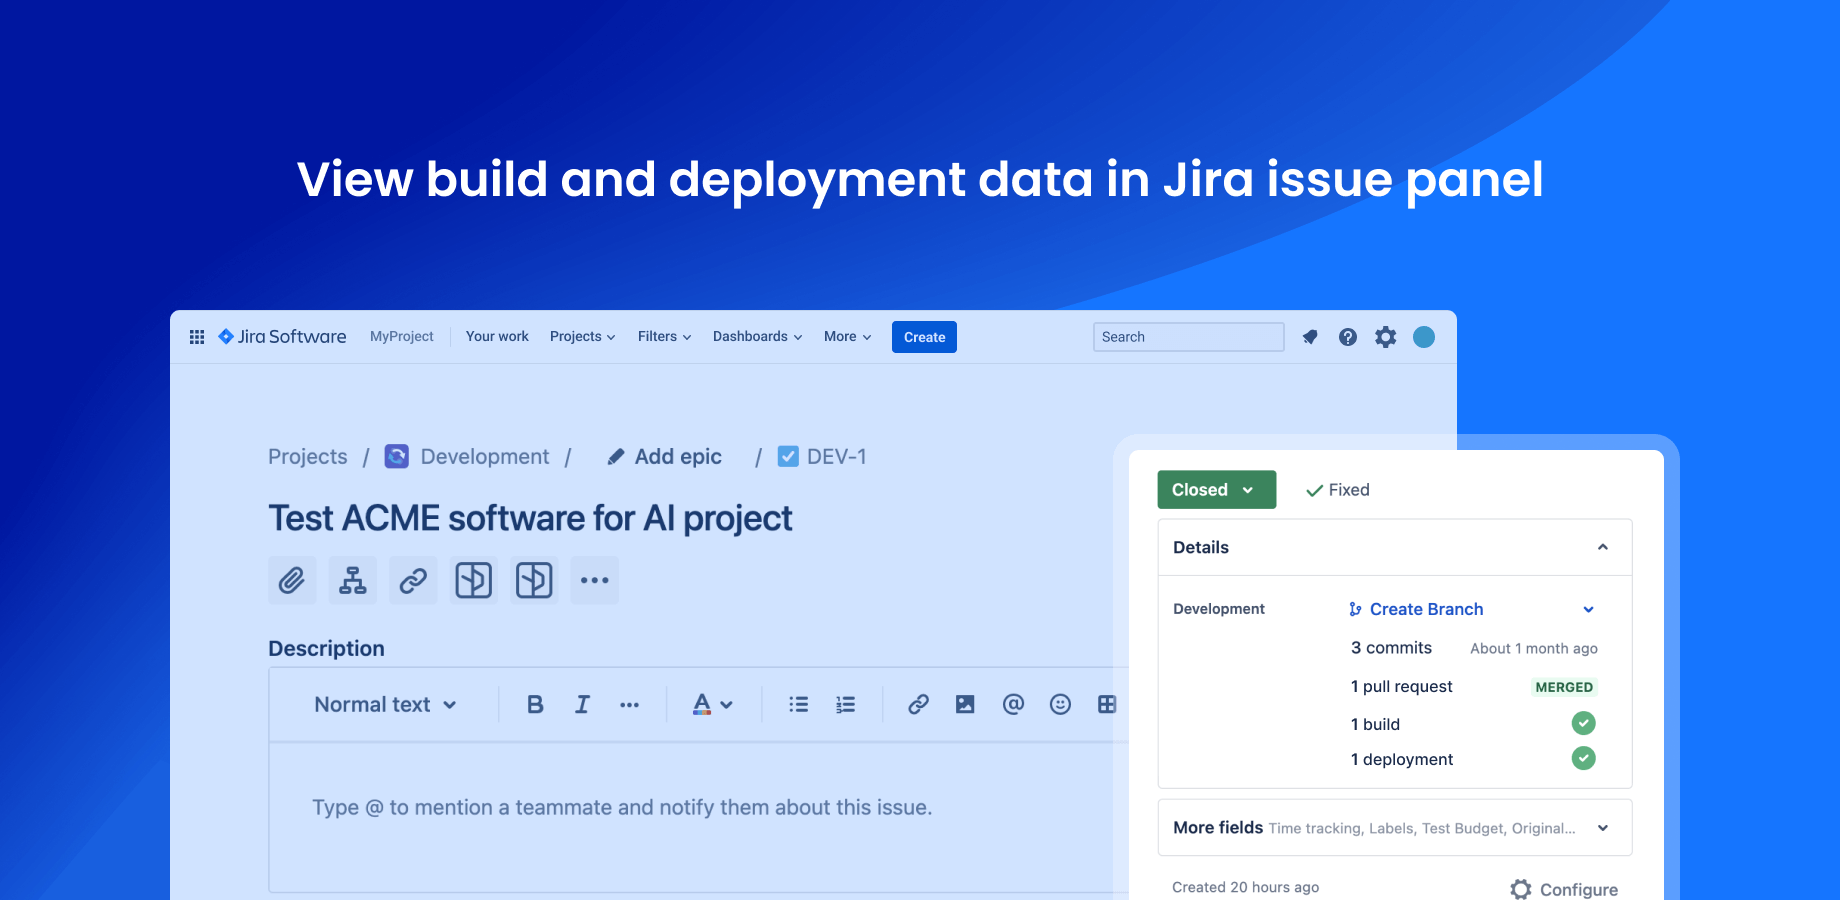 Build and deployment data is shown on the right panel of a Jira issue.